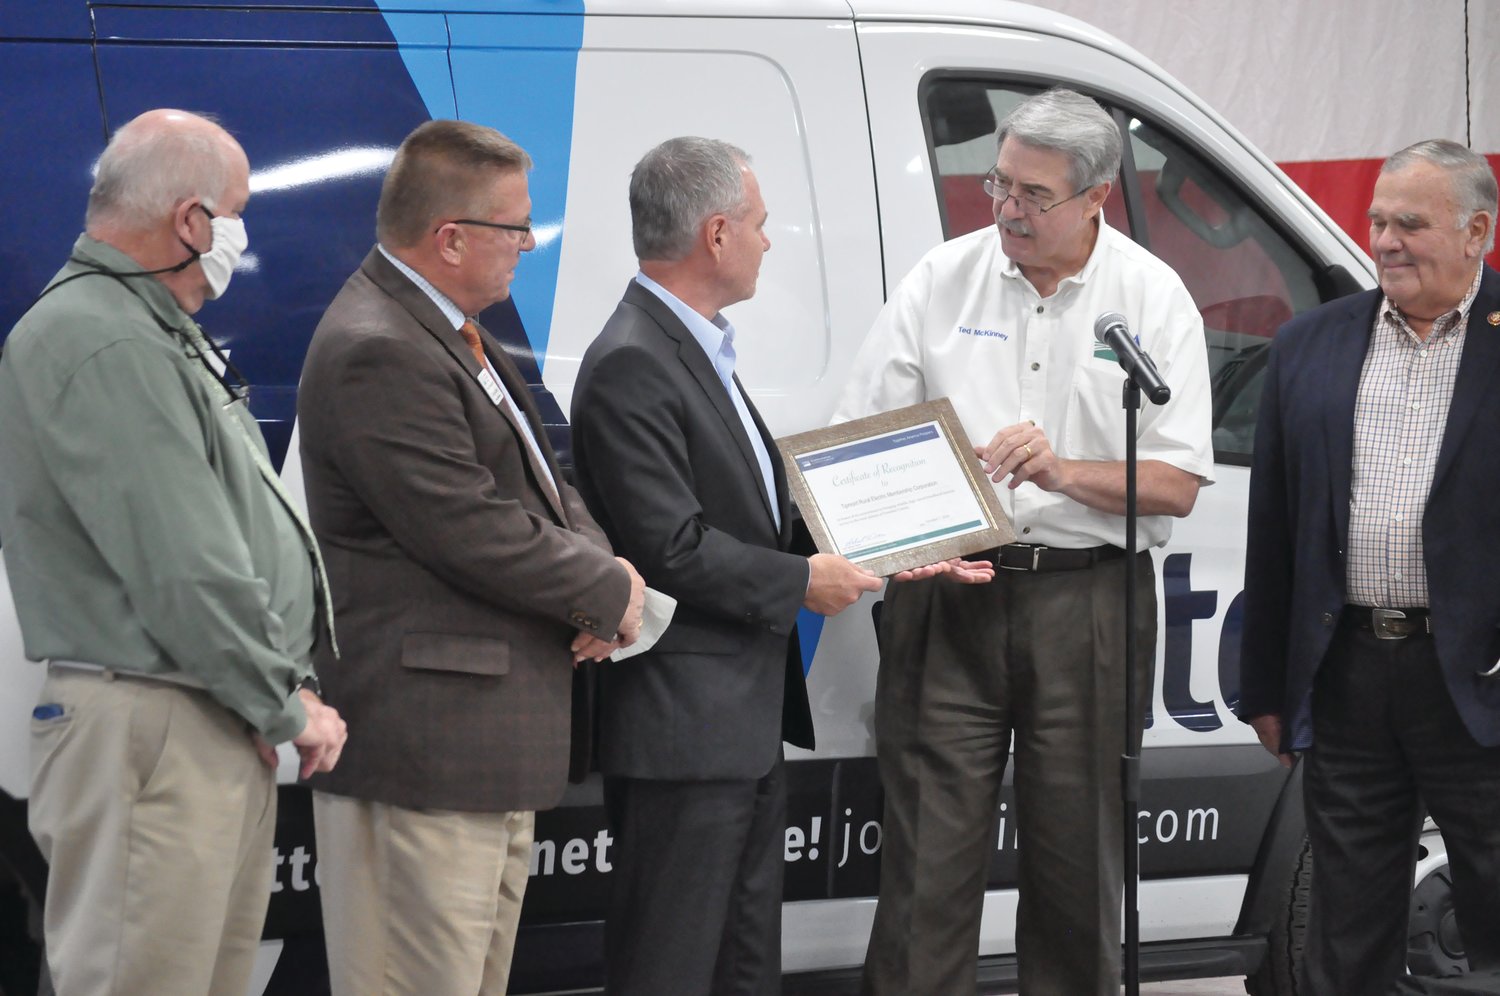 Ted McKinney, undersecretary of agriculture for trade and foreign agricultural affairs, presents a certificate of recognition to Tipmont REMC CEO Ron Holcomb as dignitaries look on Wednesday near Kingman. Tipmont/Wintek received more than $1 million in federal matching funds to expand high-speed internet to additional homes, farms and businesses in Fountain County.